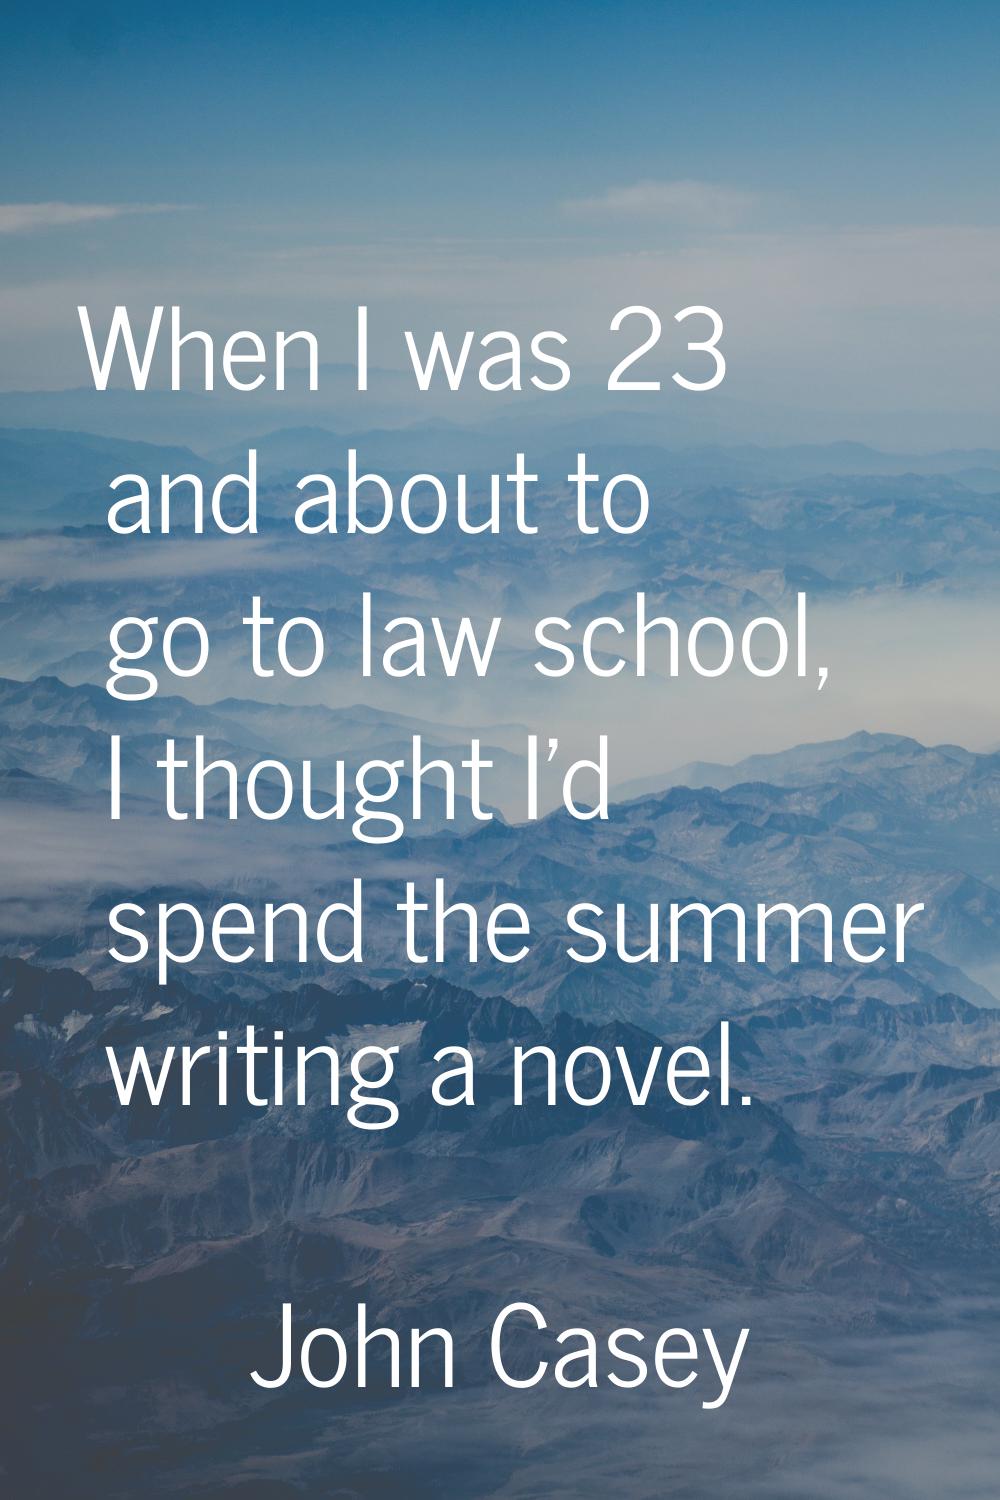 When I was 23 and about to go to law school, I thought I'd spend the summer writing a novel.